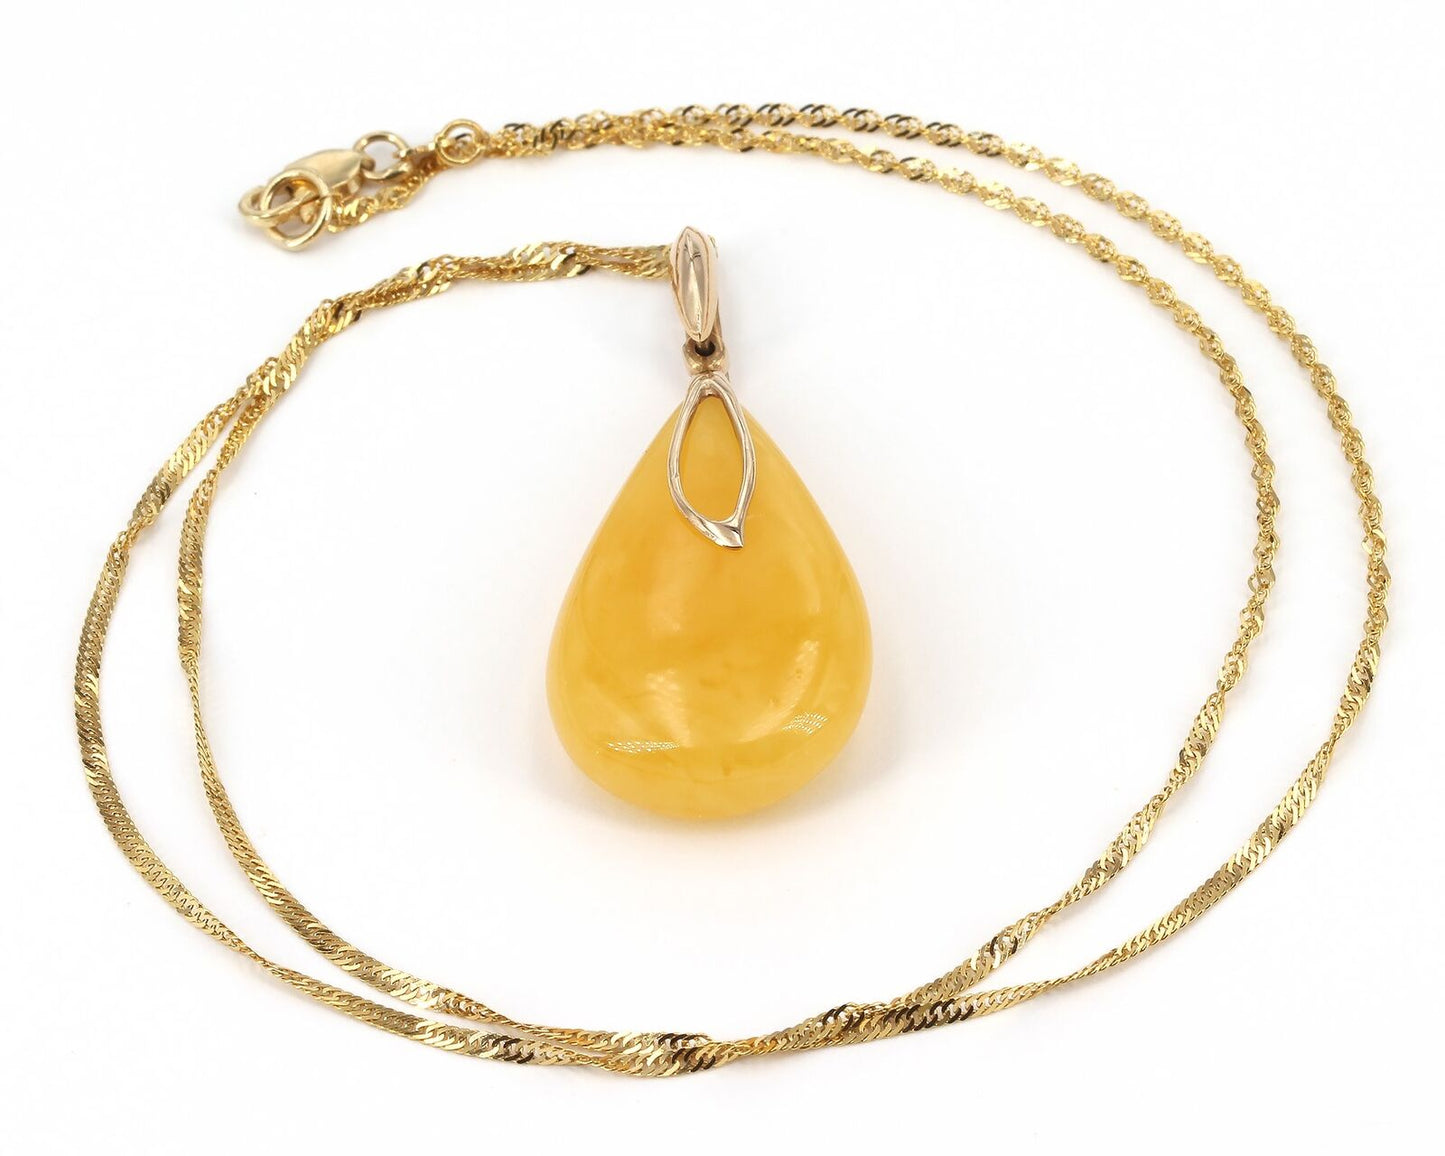 Solid 14K Gold Baltic Egg Yolk Amber Pendant on 18" Singapore Chain Necklace